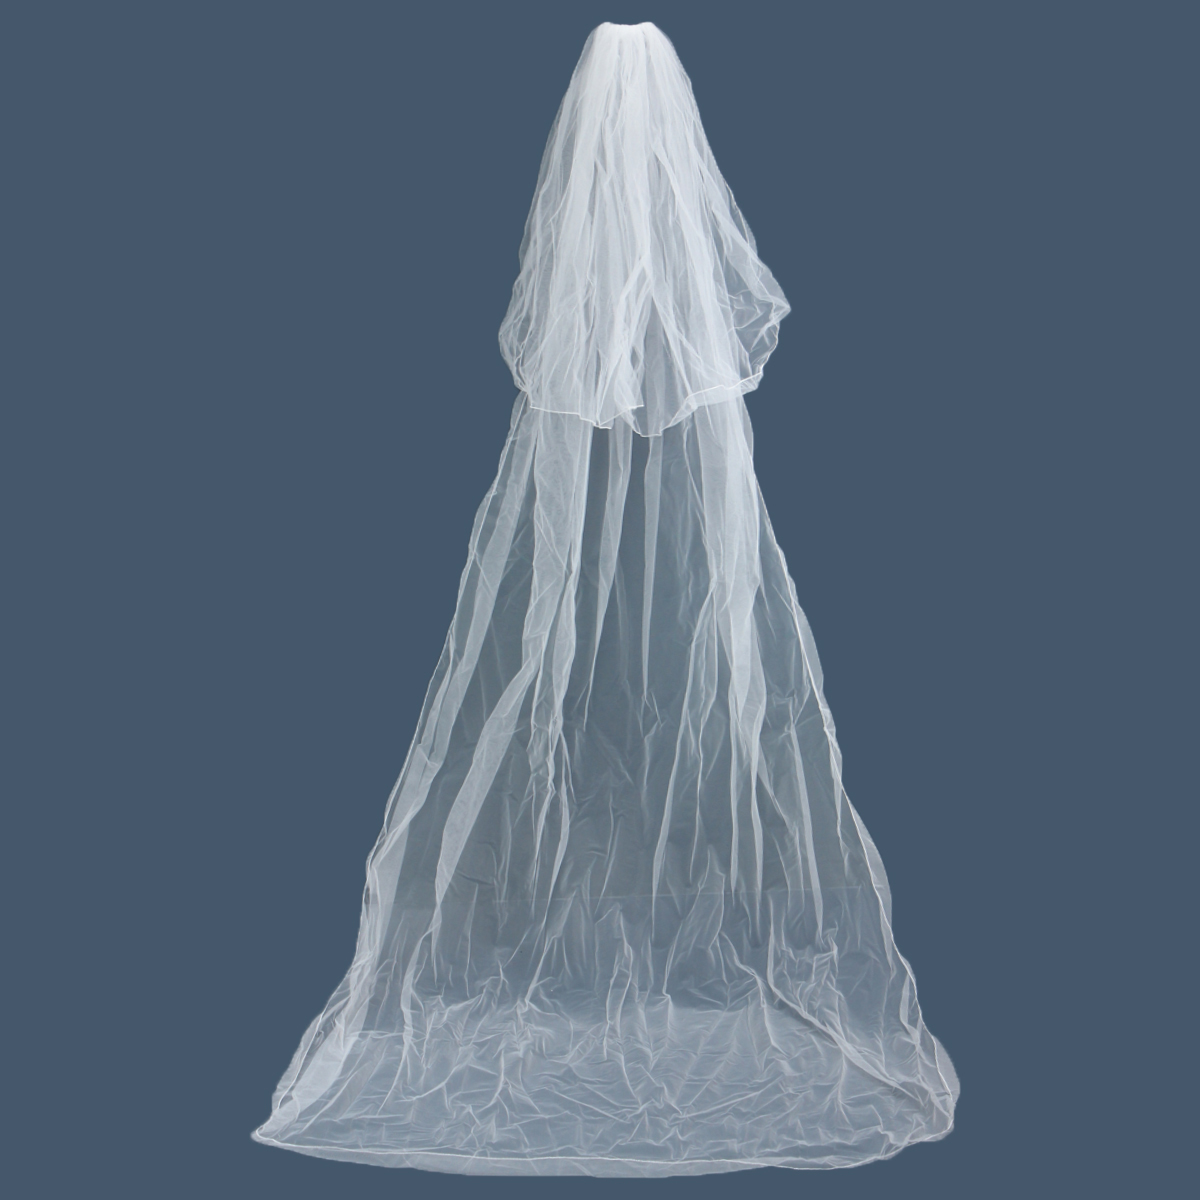 3-Metres-Two-Layers-Long-Wedding-Veil-Comb-Soft-Tulle-Cut-Edge-Cathedral-Bride-Accessories-1035602